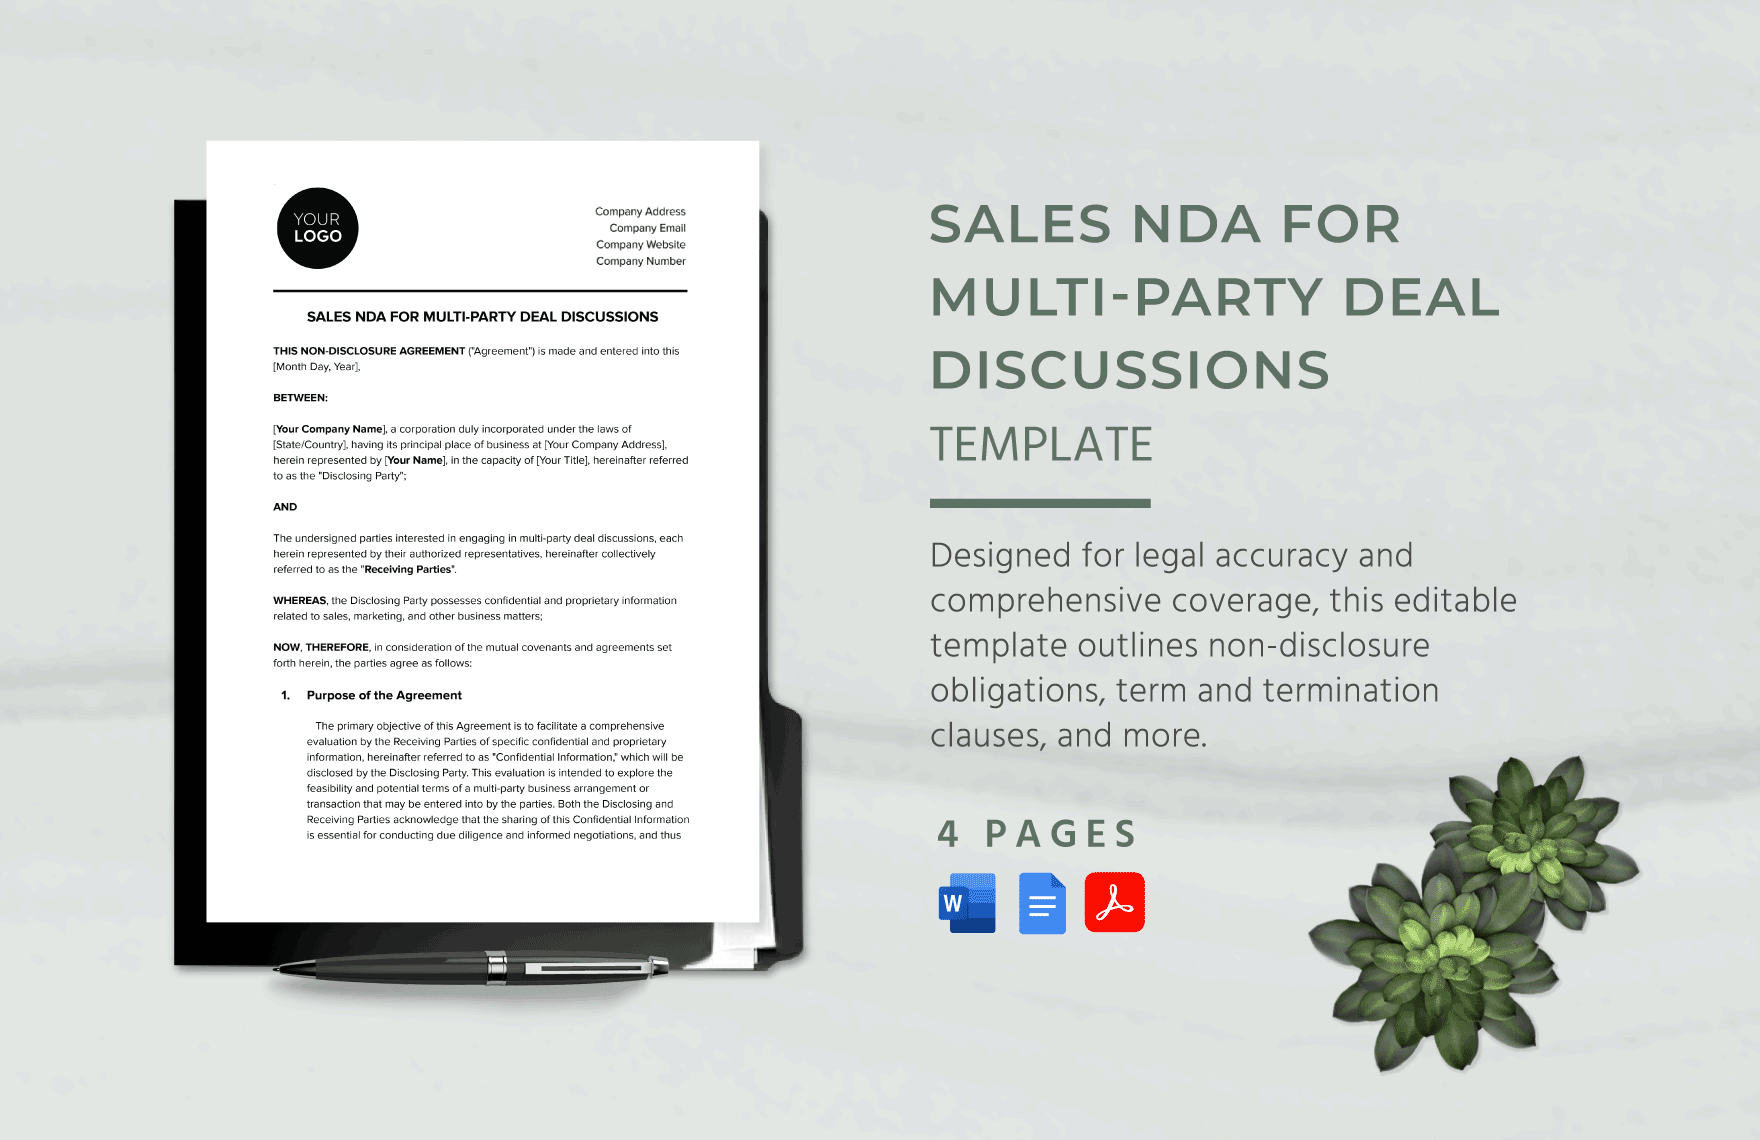 Sales NDA for Multi-Party Deal Discussions Template